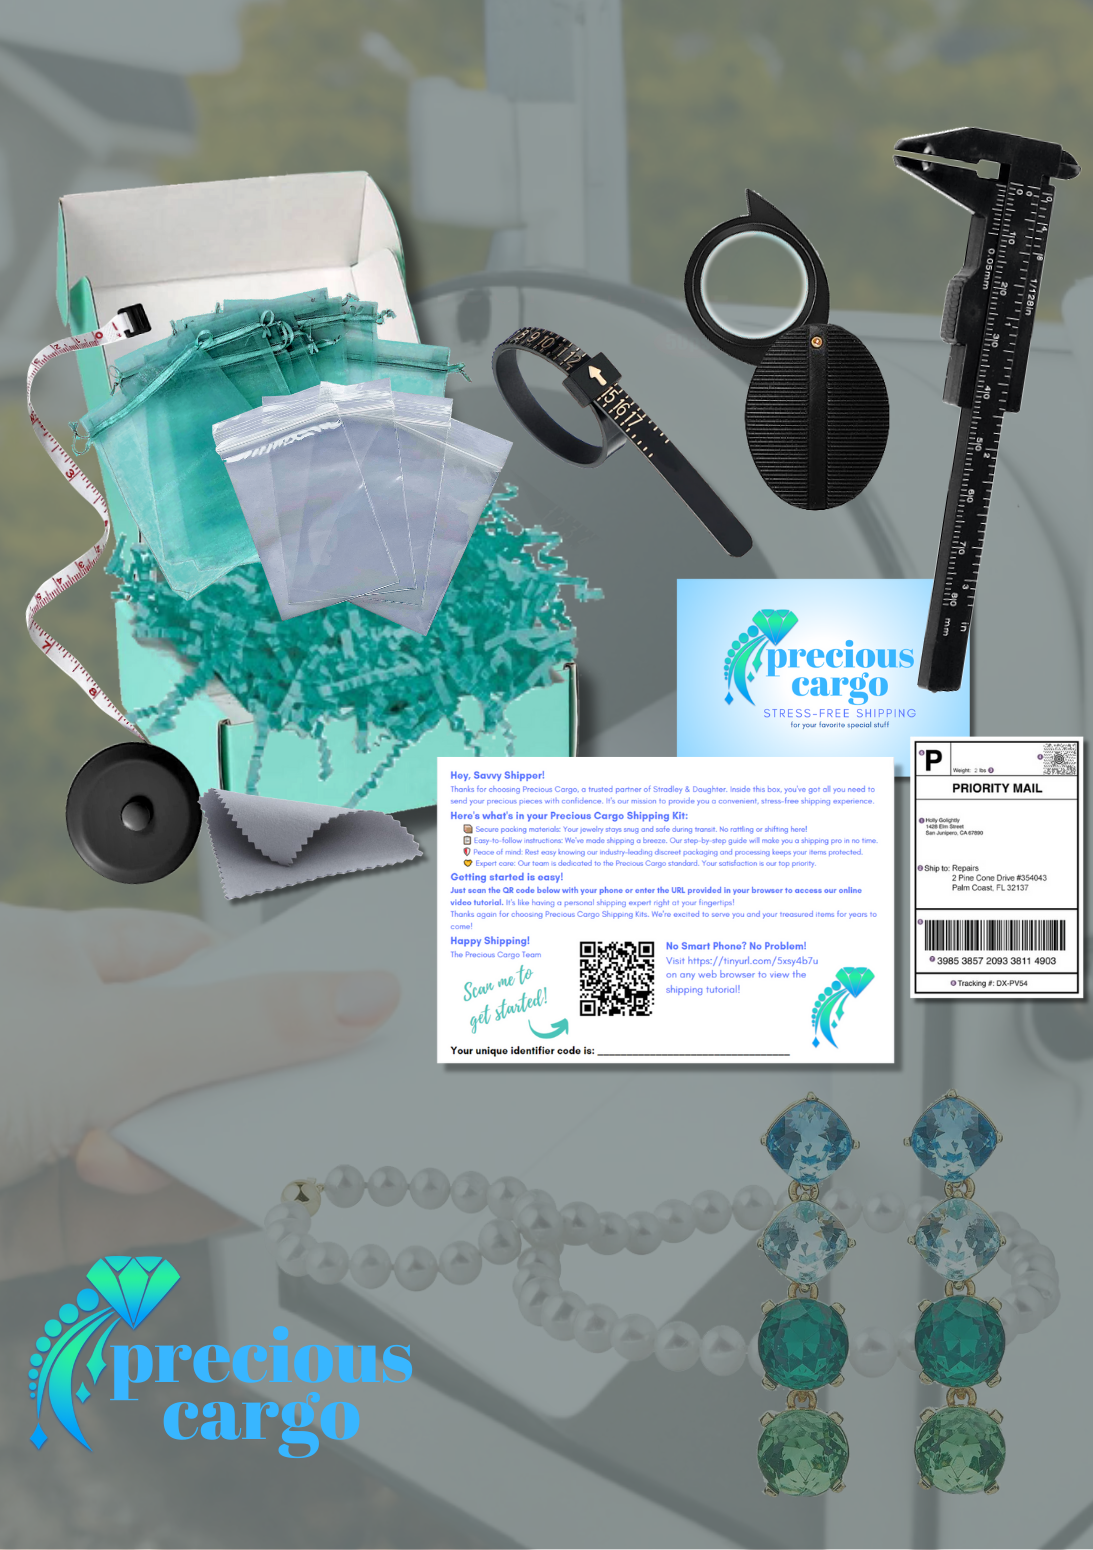 A Precious Cargo Stress Free Shipping Kit. The photo illustrates the components of the kit, including a jeweler's loupe, calipers, measuring tape, ring sizer, and packaging materials. 